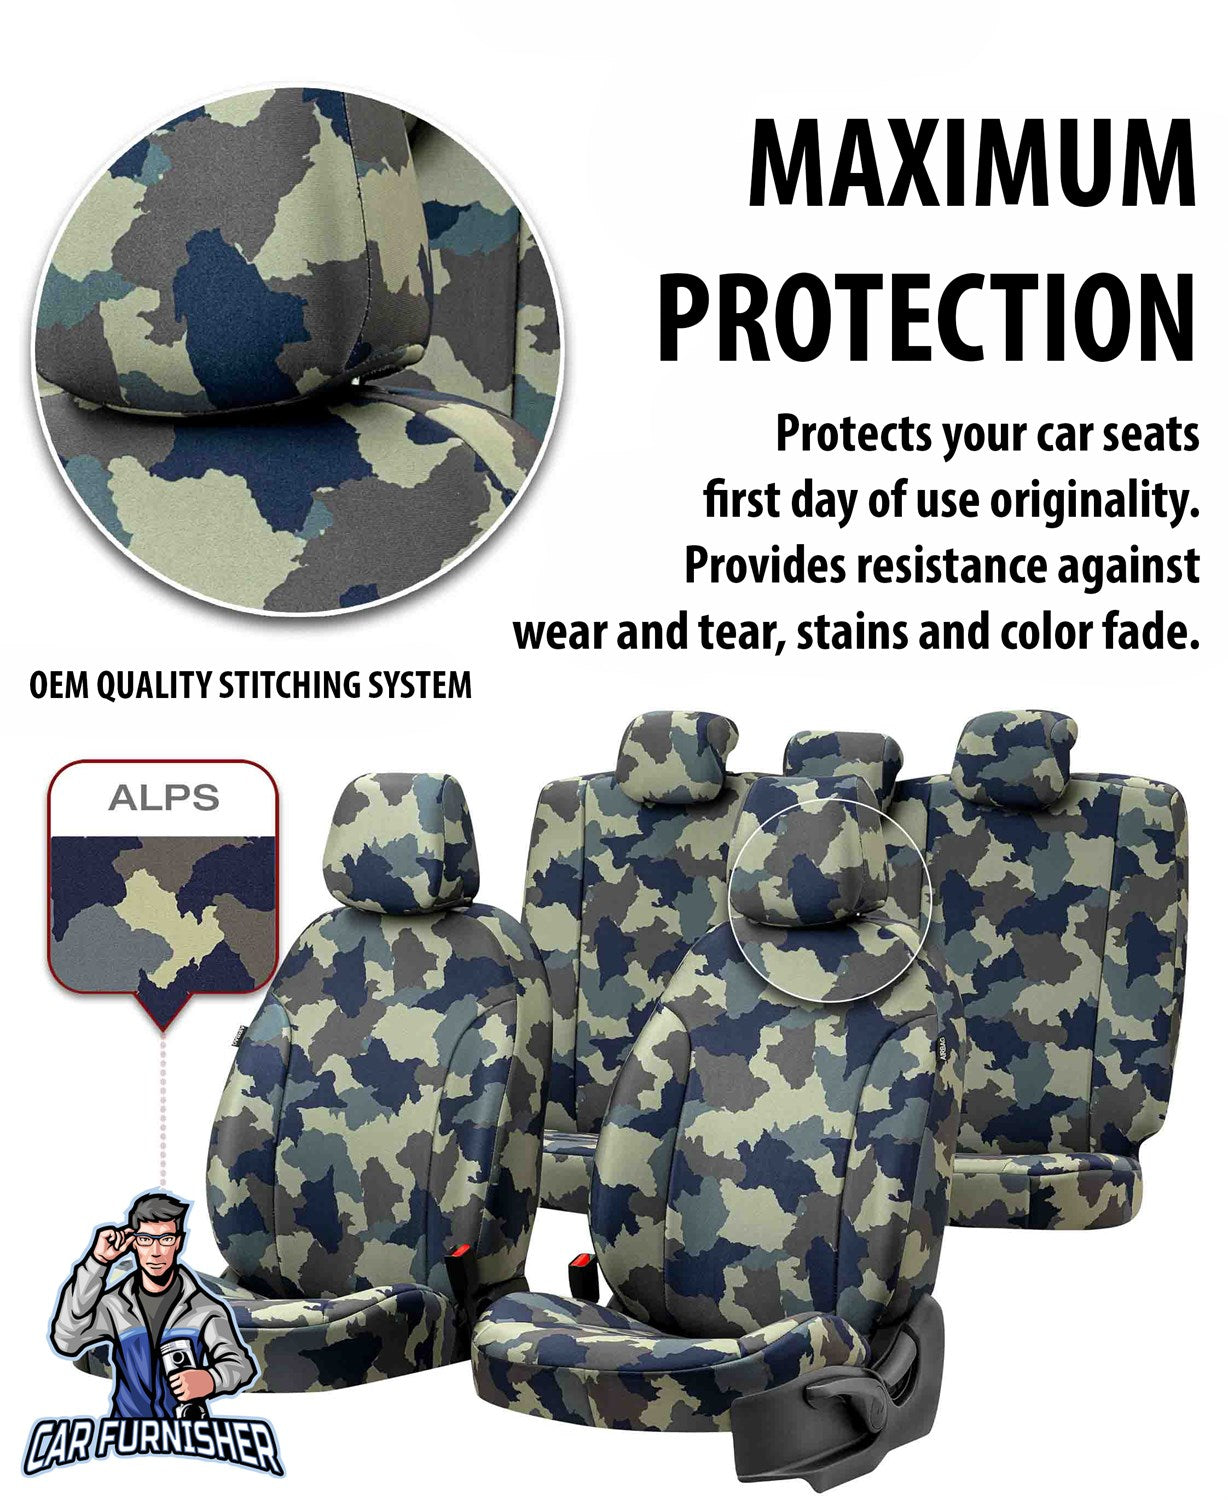 Ford C-Max Seat Covers Camouflage Waterproof Design Arctic Camo Waterproof Fabric